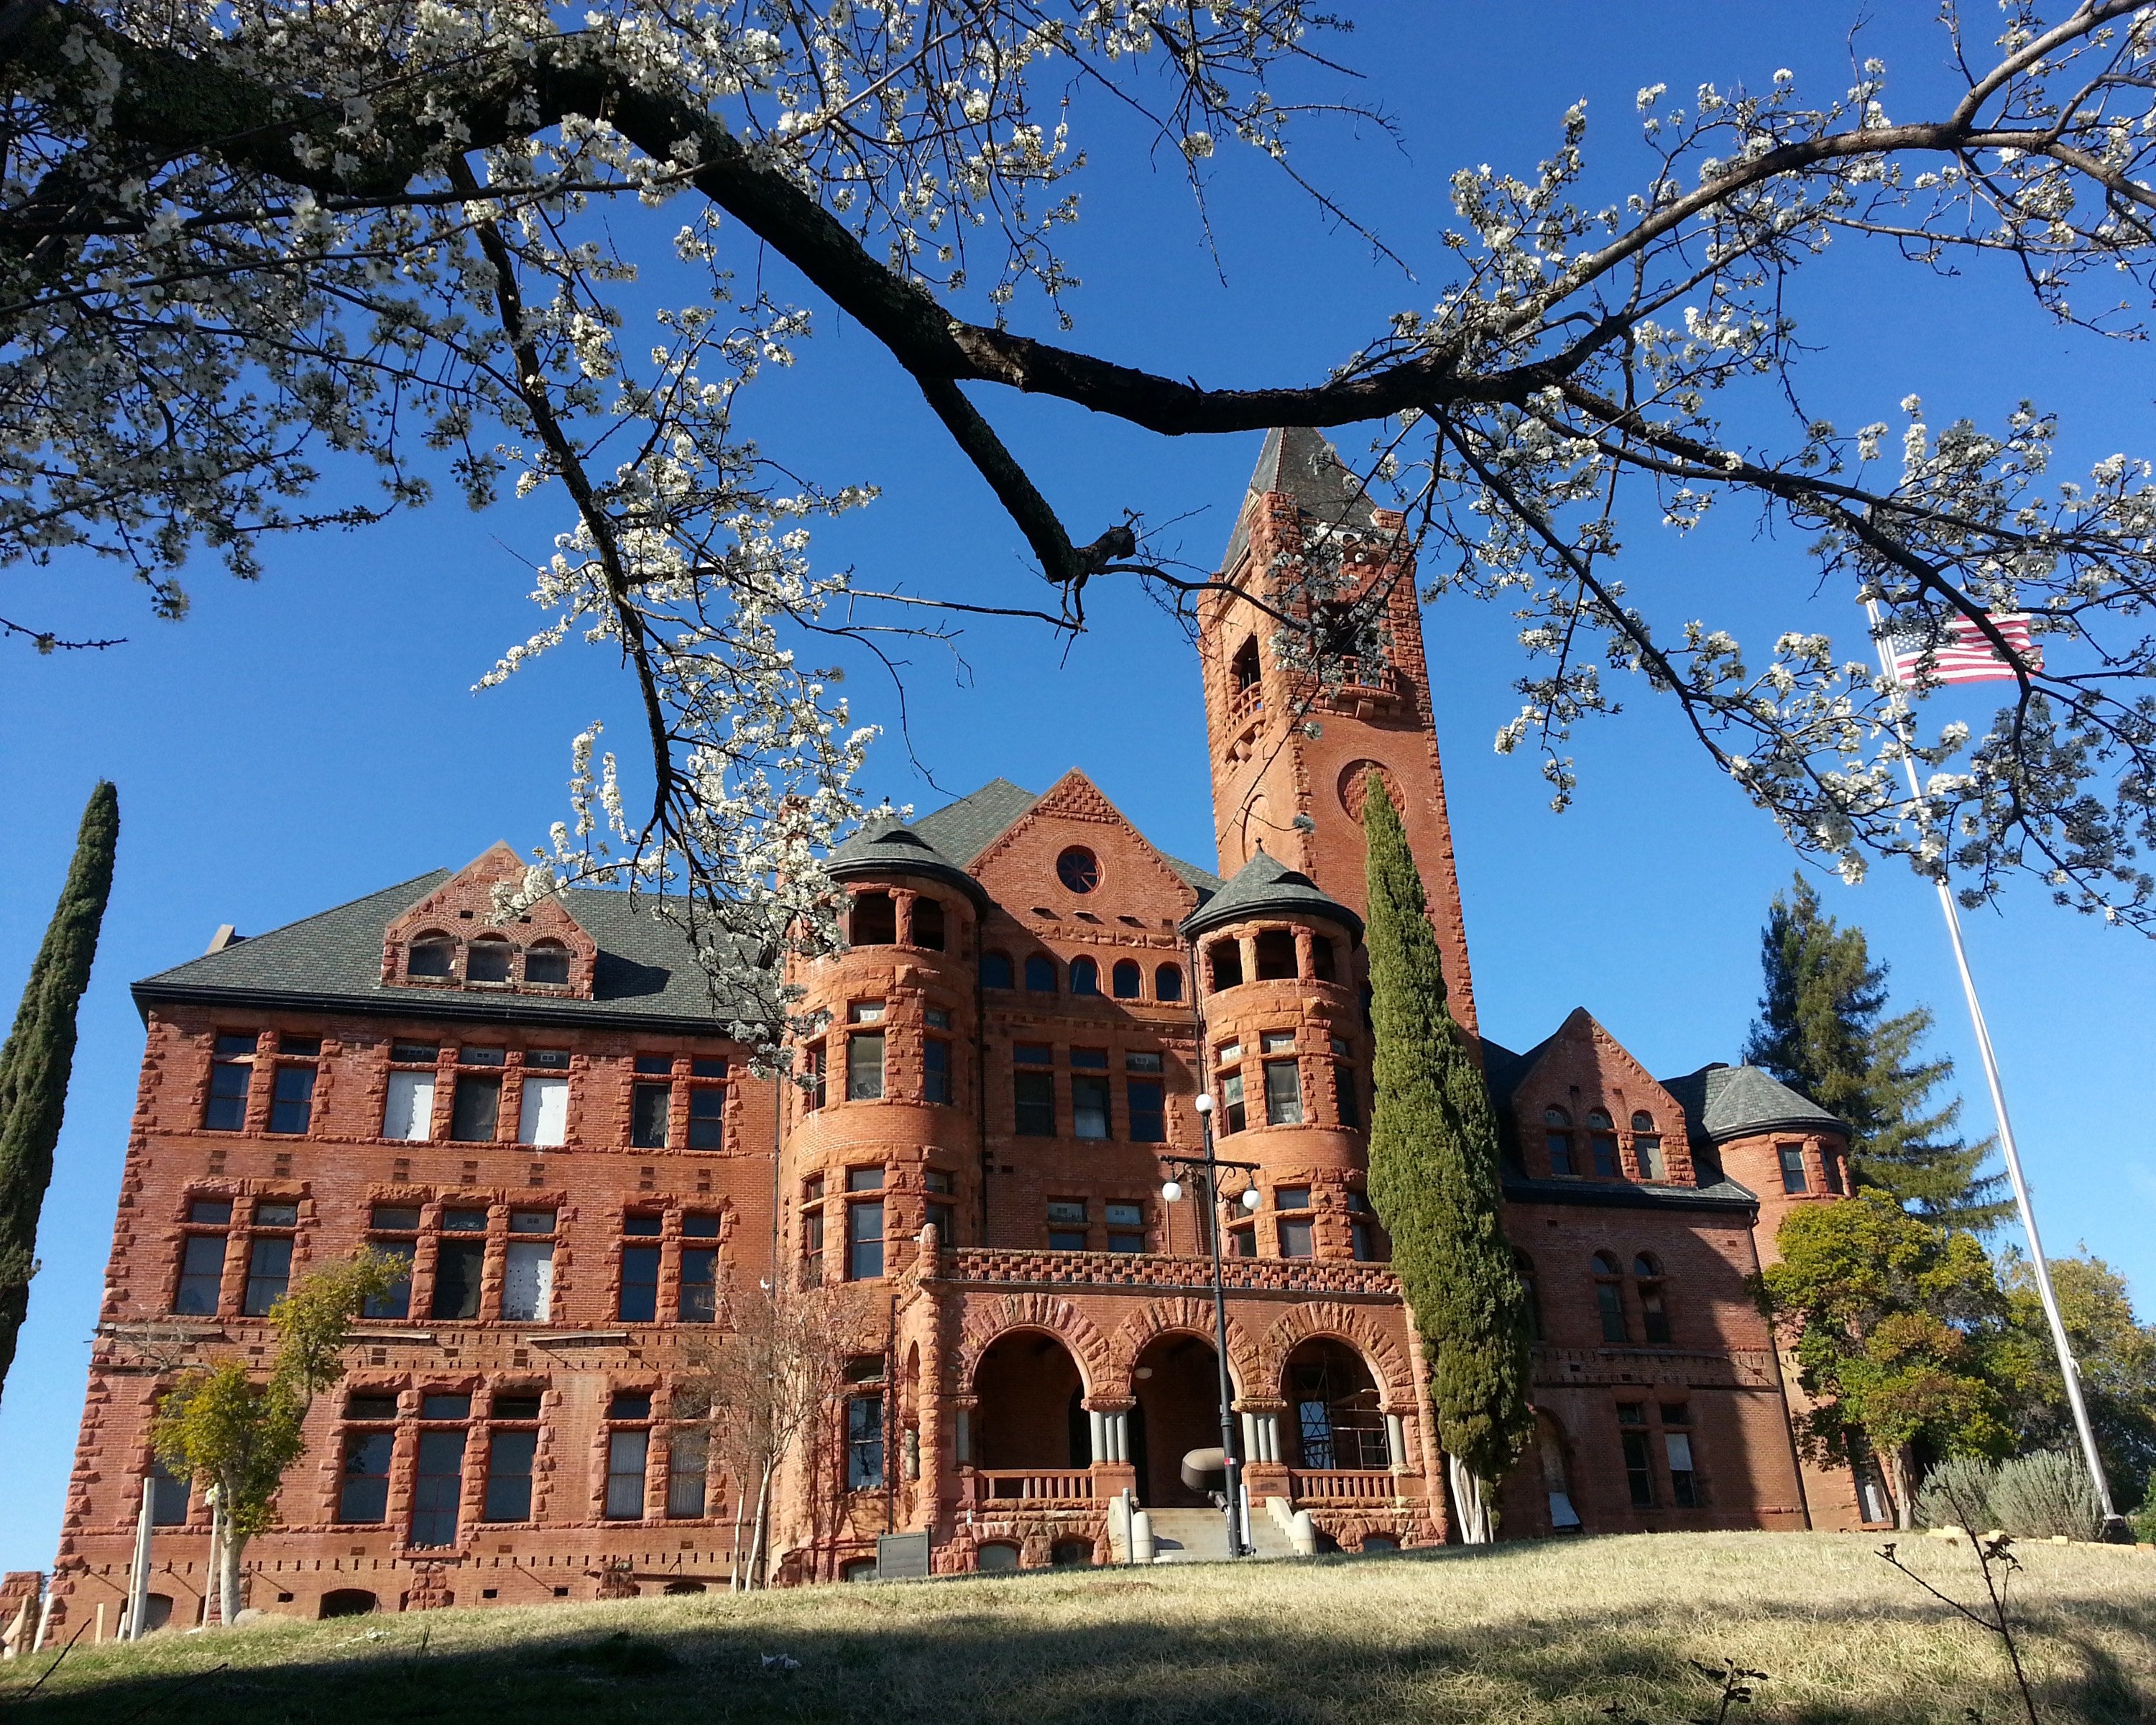 Preston Castle - large red brick building with clear blue sky, American flag, and blossoms on tree